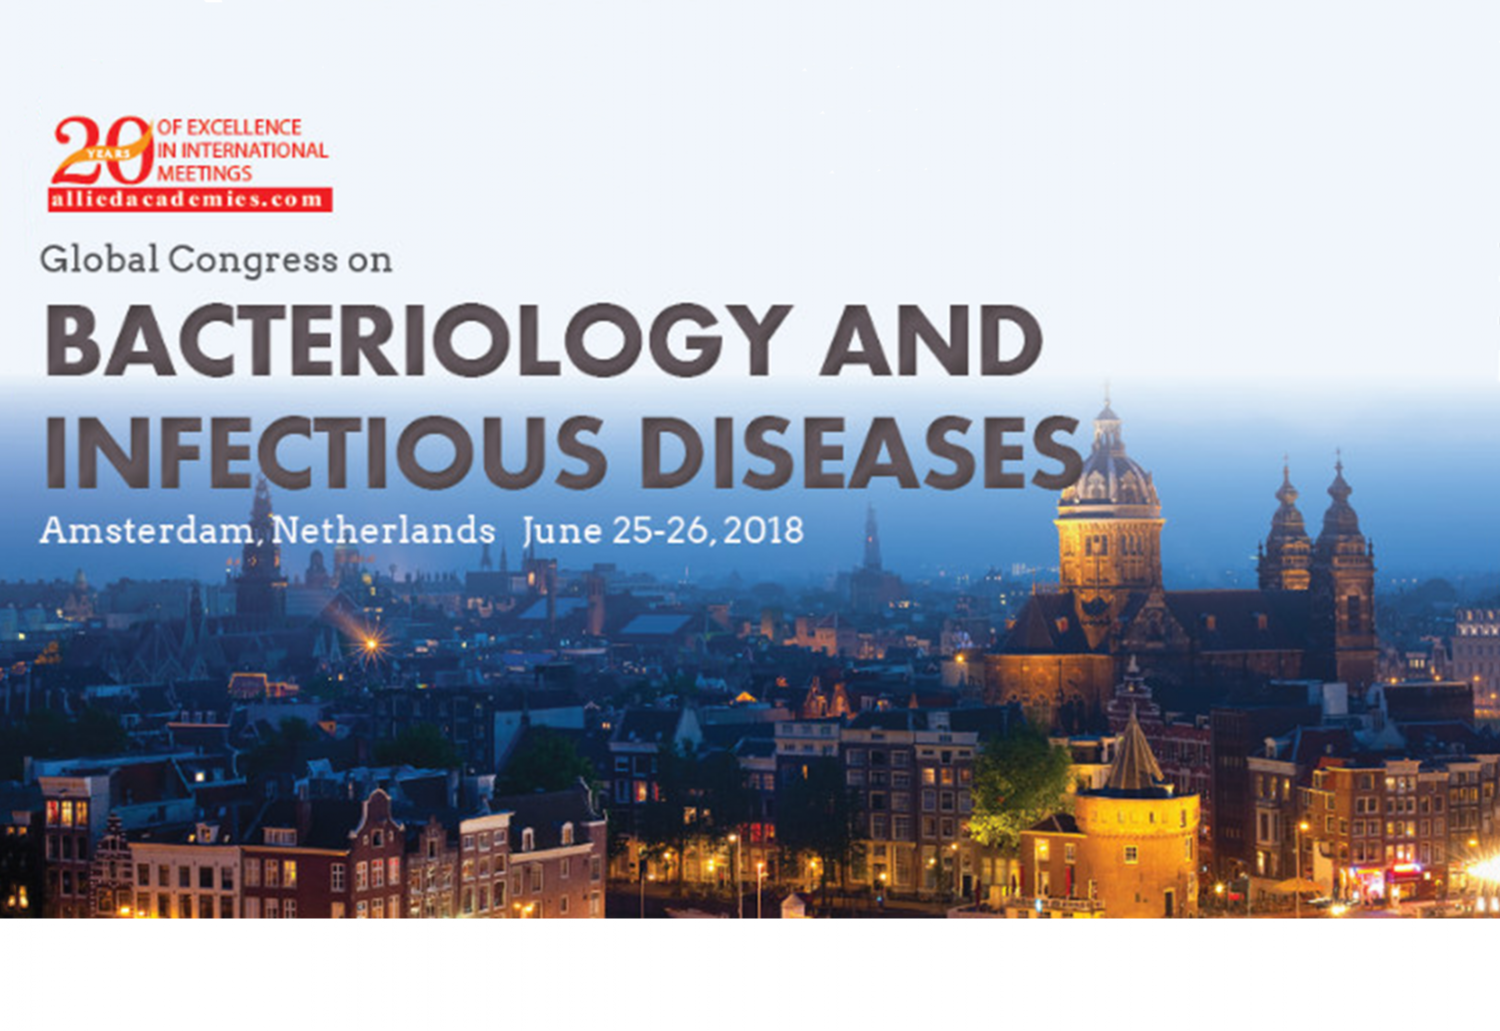 Bacteriology and Infectious Diseases Congress